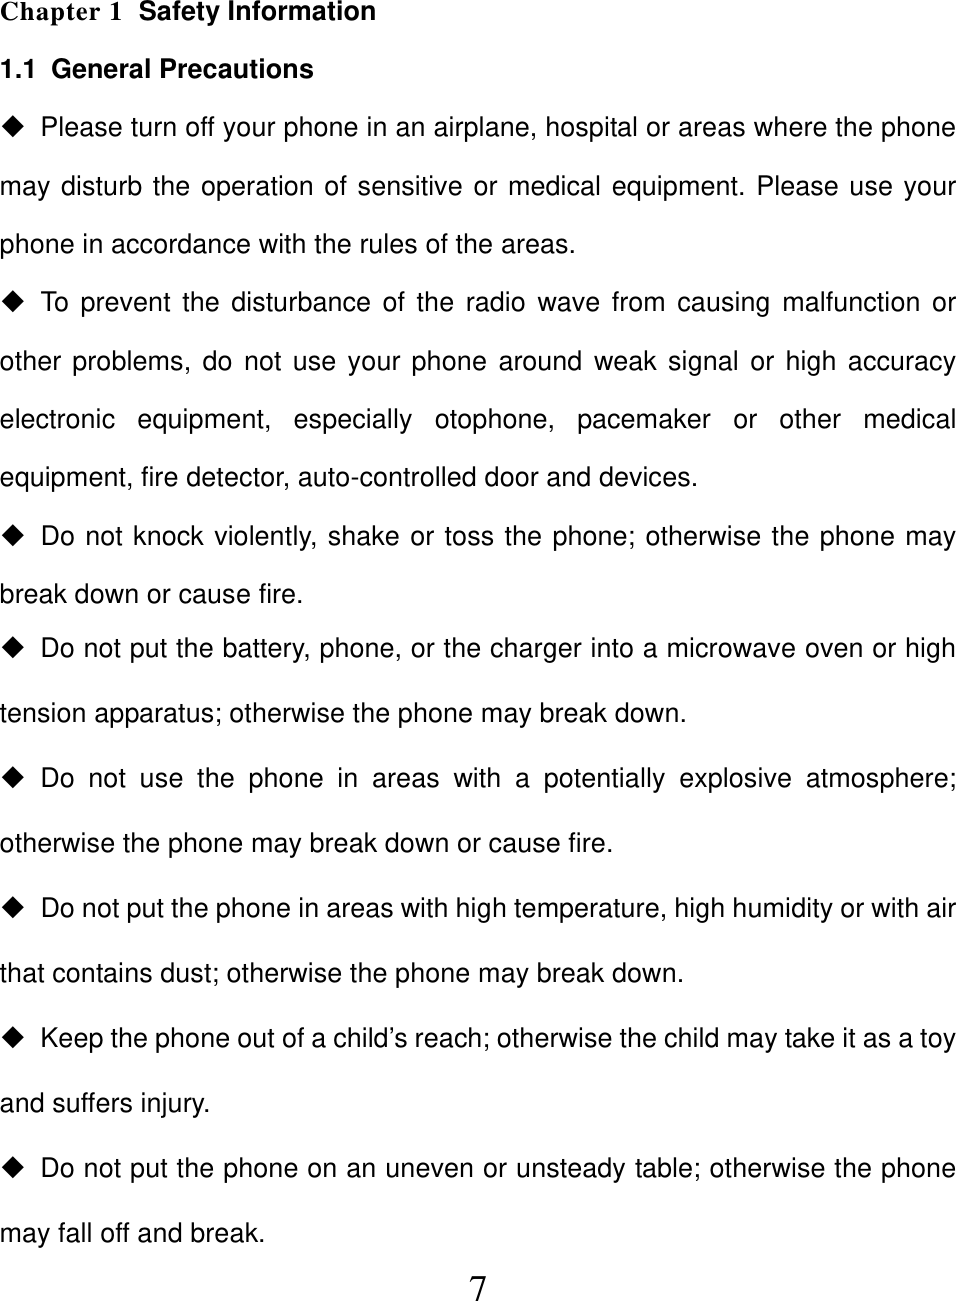  7 Chapter 1  Safety Information 1.1 General Precautions   Please turn off your phone in an airplane, hospital or areas where the phone may disturb the operation of sensitive or medical equipment. Please use your phone in accordance with the rules of the areas.  To prevent the disturbance of the radio wave from causing malfunction or other problems, do not use your phone around weak signal or high accuracy electronic equipment, especially otophone, pacemaker or other medical equipment, fire detector, auto-controlled door and devices.   Do not knock violently, shake or toss the phone; otherwise the phone may break down or cause fire.   Do not put the battery, phone, or the charger into a microwave oven or high tension apparatus; otherwise the phone may break down.  Do not use the phone in areas with a potentially explosive atmosphere; otherwise the phone may break down or cause fire.   Do not put the phone in areas with high temperature, high humidity or with air that contains dust; otherwise the phone may break down.   Keep the phone out of a child’s reach; otherwise the child may take it as a toy and suffers injury.   Do not put the phone on an uneven or unsteady table; otherwise the phone may fall off and break. 